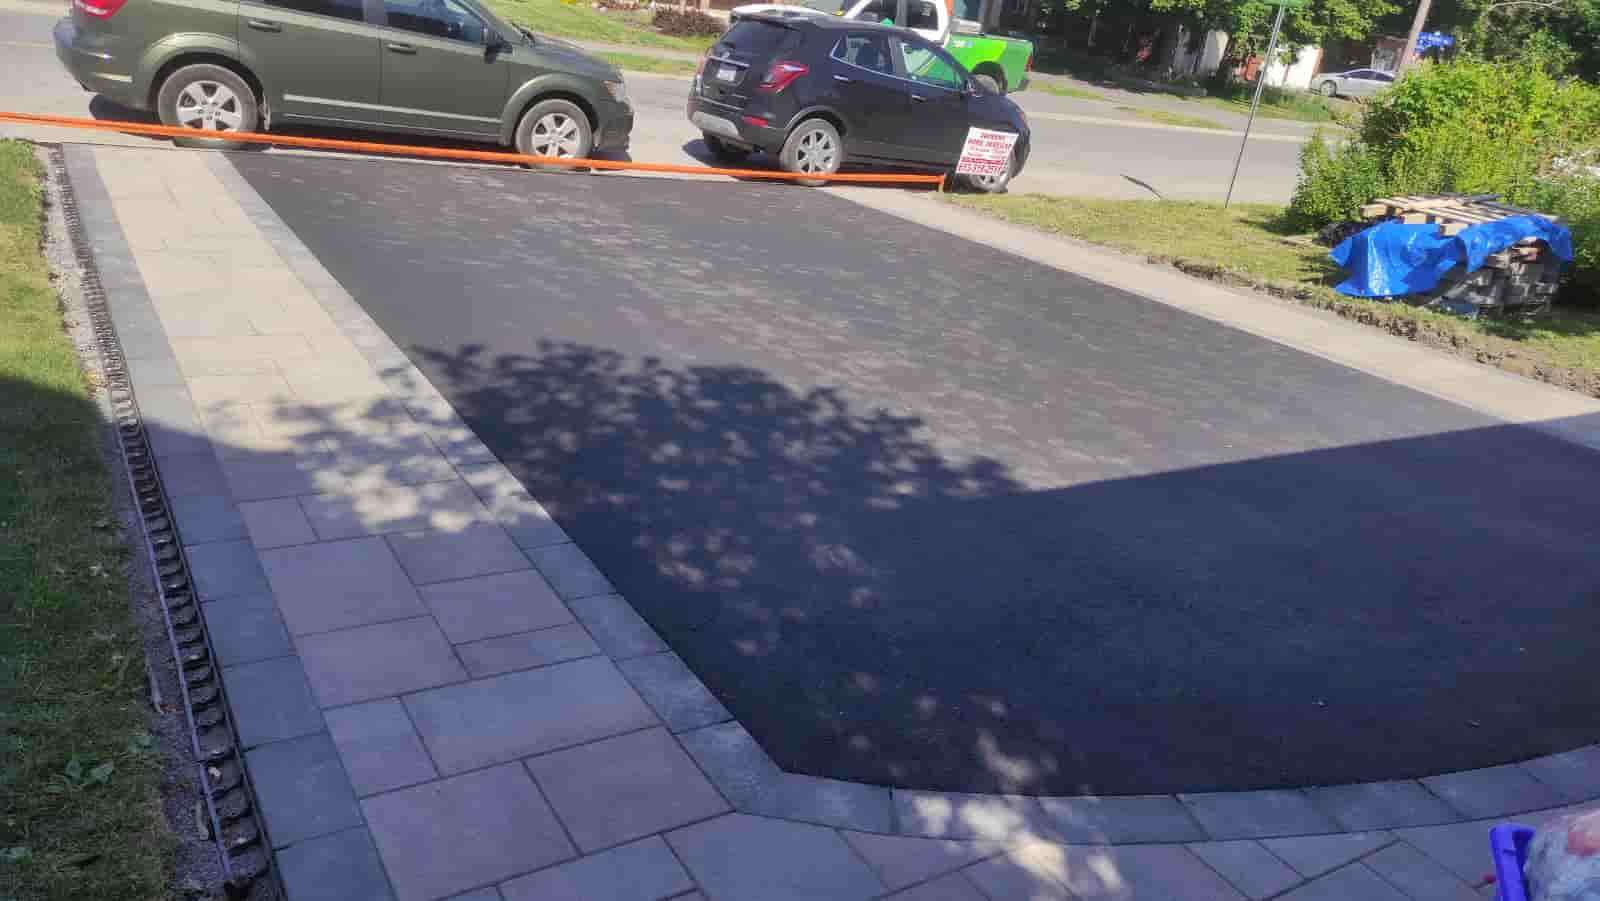 A new asphalt driveway installation with a neatly placed interlocking tile sidewalk. The contrasting colors of the grey tiles and dark asphalt create a clean and modern look.